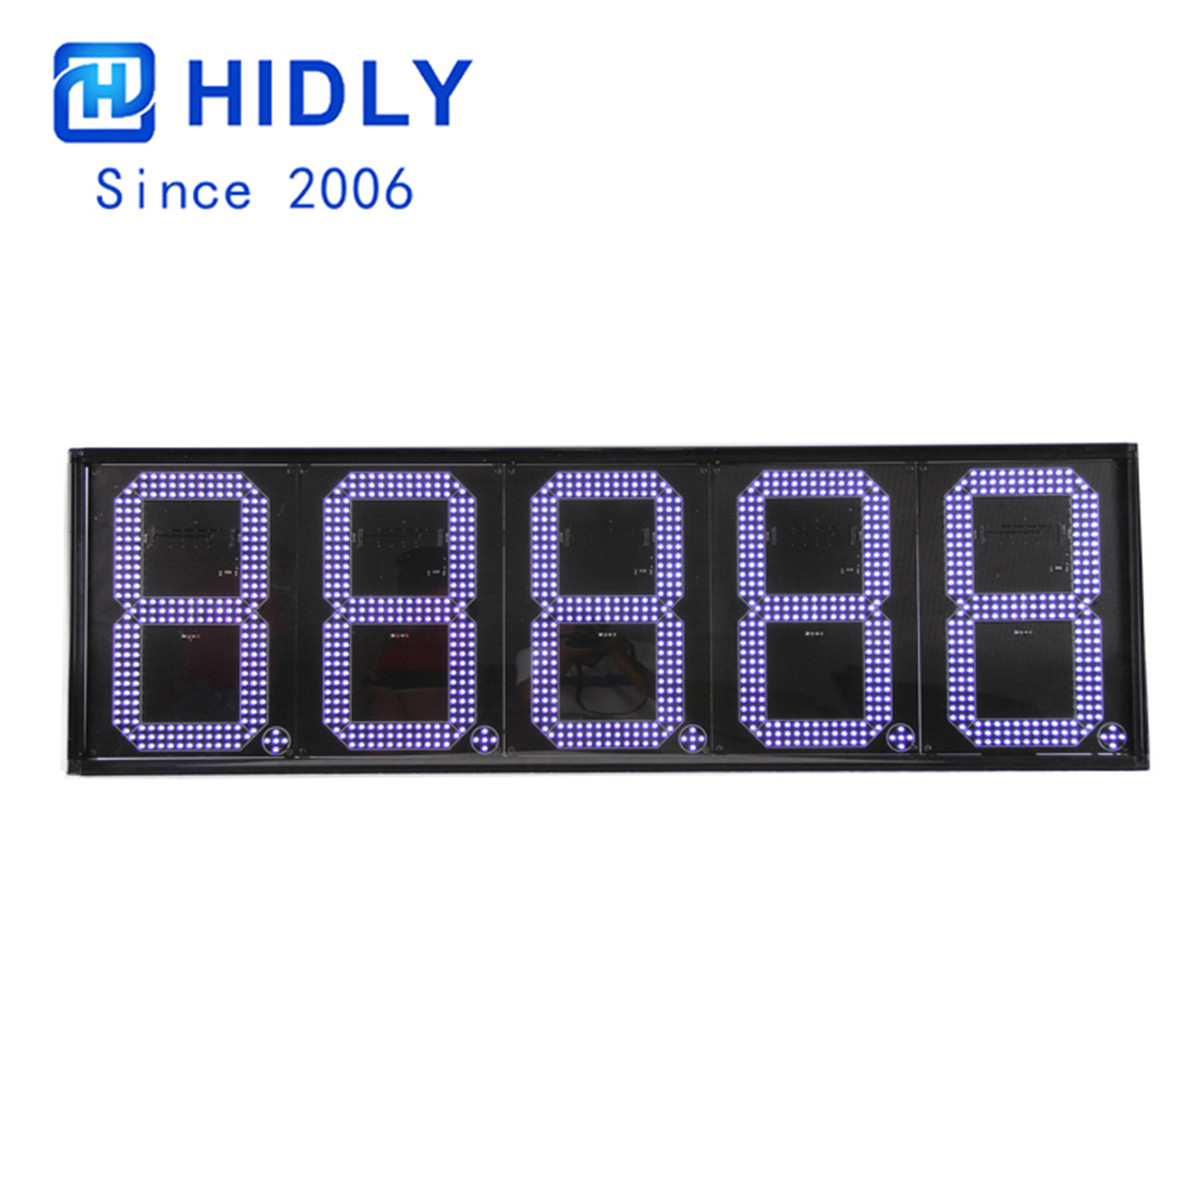 LED gas signs